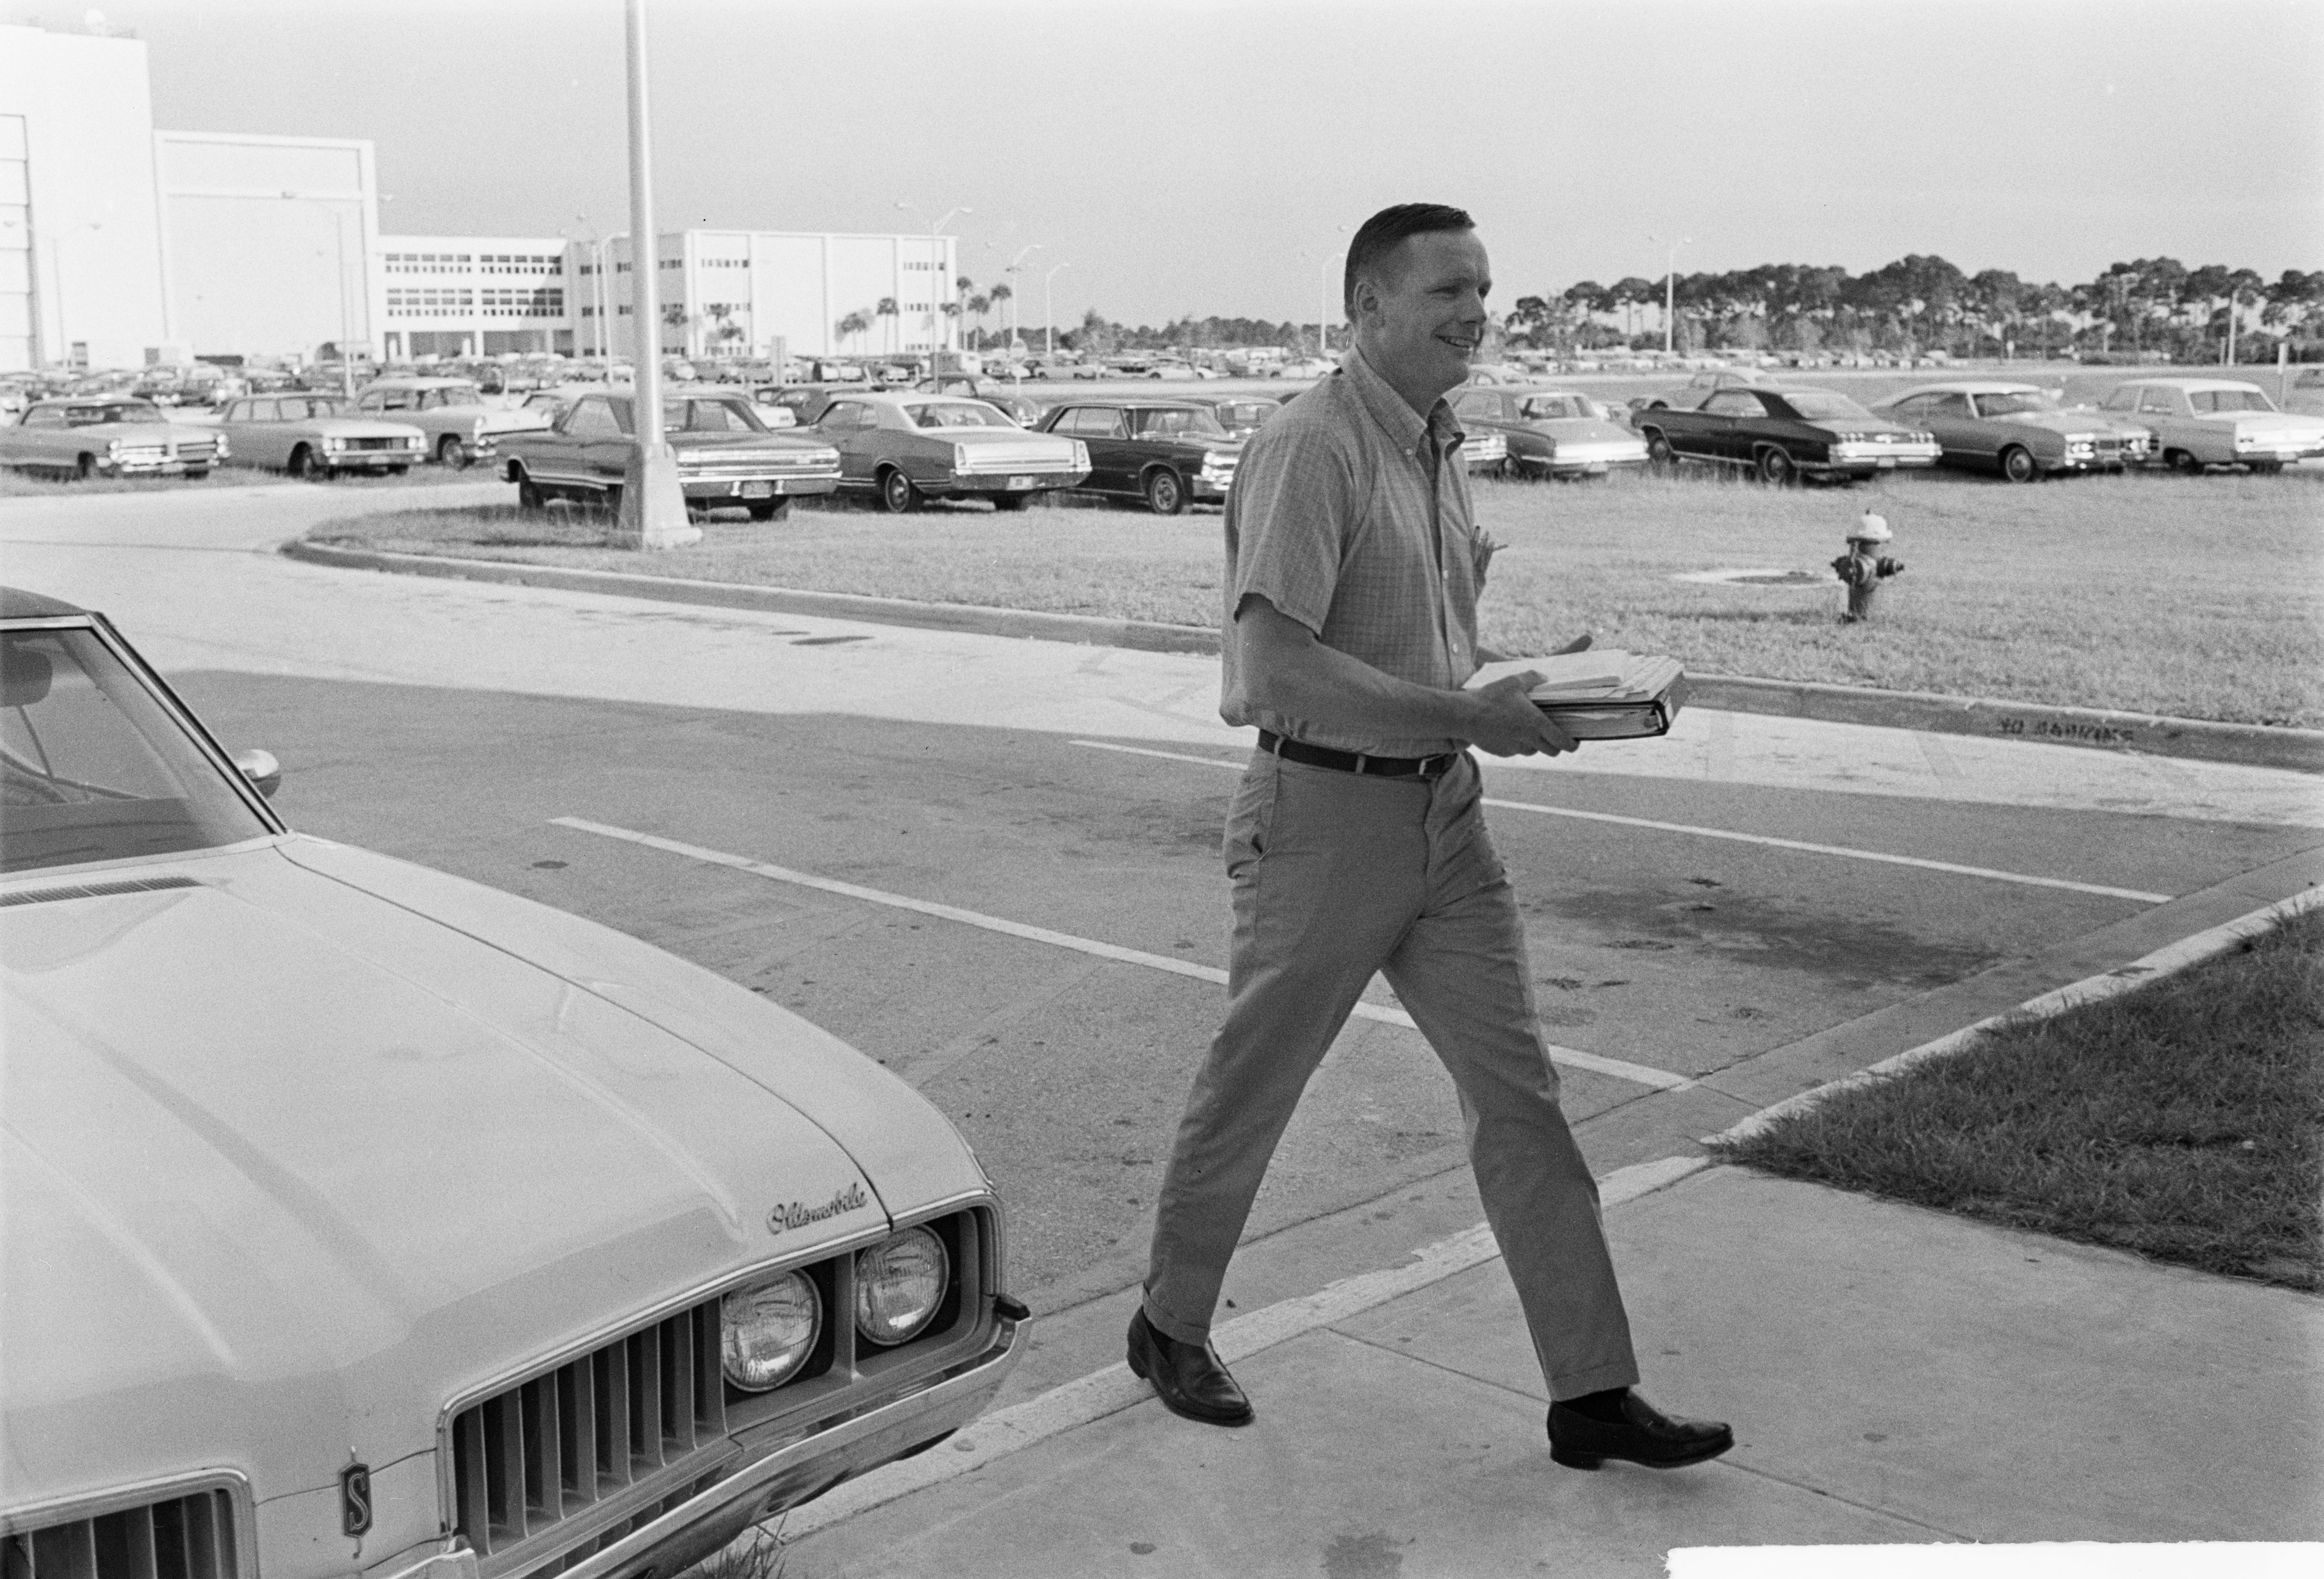 Apollo 11 astronaut Neil A. Armstrong arrive for work at NASA's Kennedy Space Center in Florida four days before launch